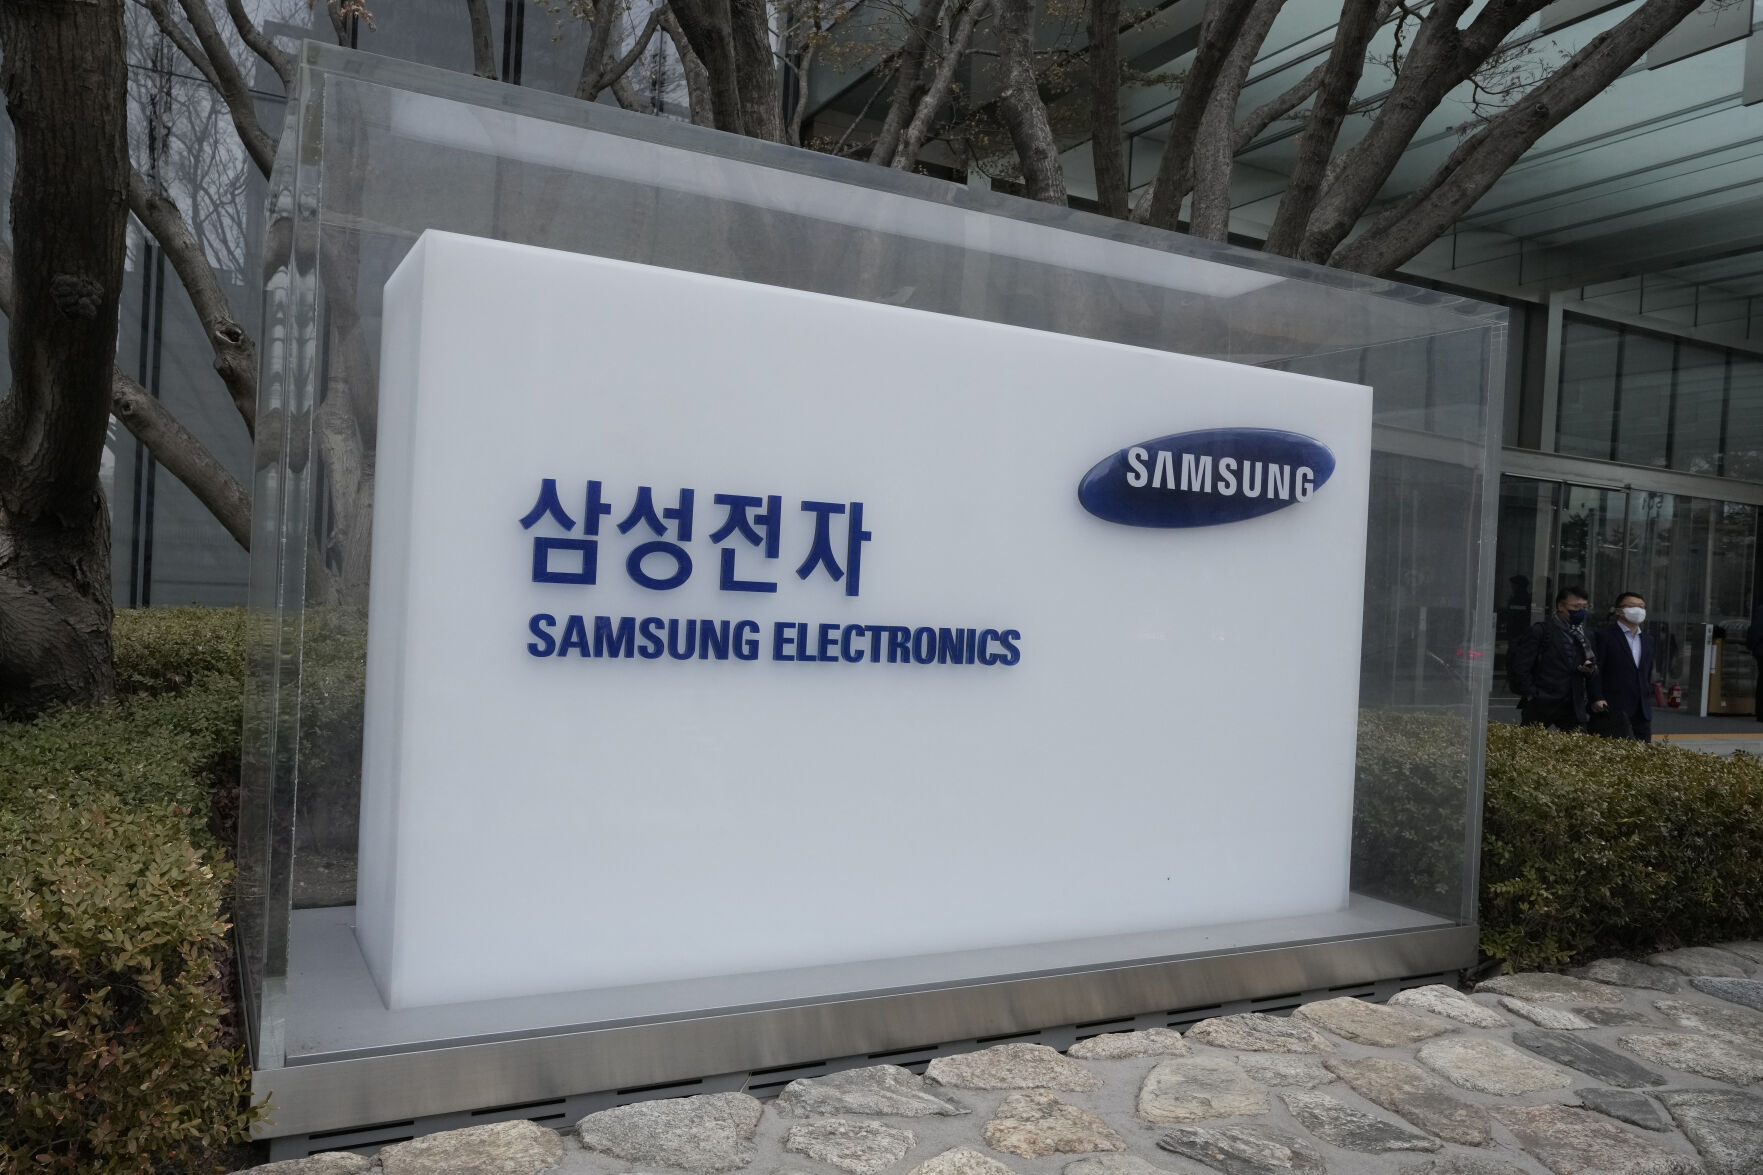 <p>FILE - The logo of the Samsung Electronics Co. is seen at its office in Seoul, South Korea, Tuesday, Jan. 31, 2023. Samsung Electronics said Wednesday, March 15, 2023, it expects to invest 300 trillion won ($230 billion) over the next 20 years as part of an ambitious South Korean national project to build the world’s largest semiconductor manufacturing base near the capital, Seoul. (AP Photo/Ahn Young-joon, File)</p>   PHOTO CREDIT: Ahn Young-joon  